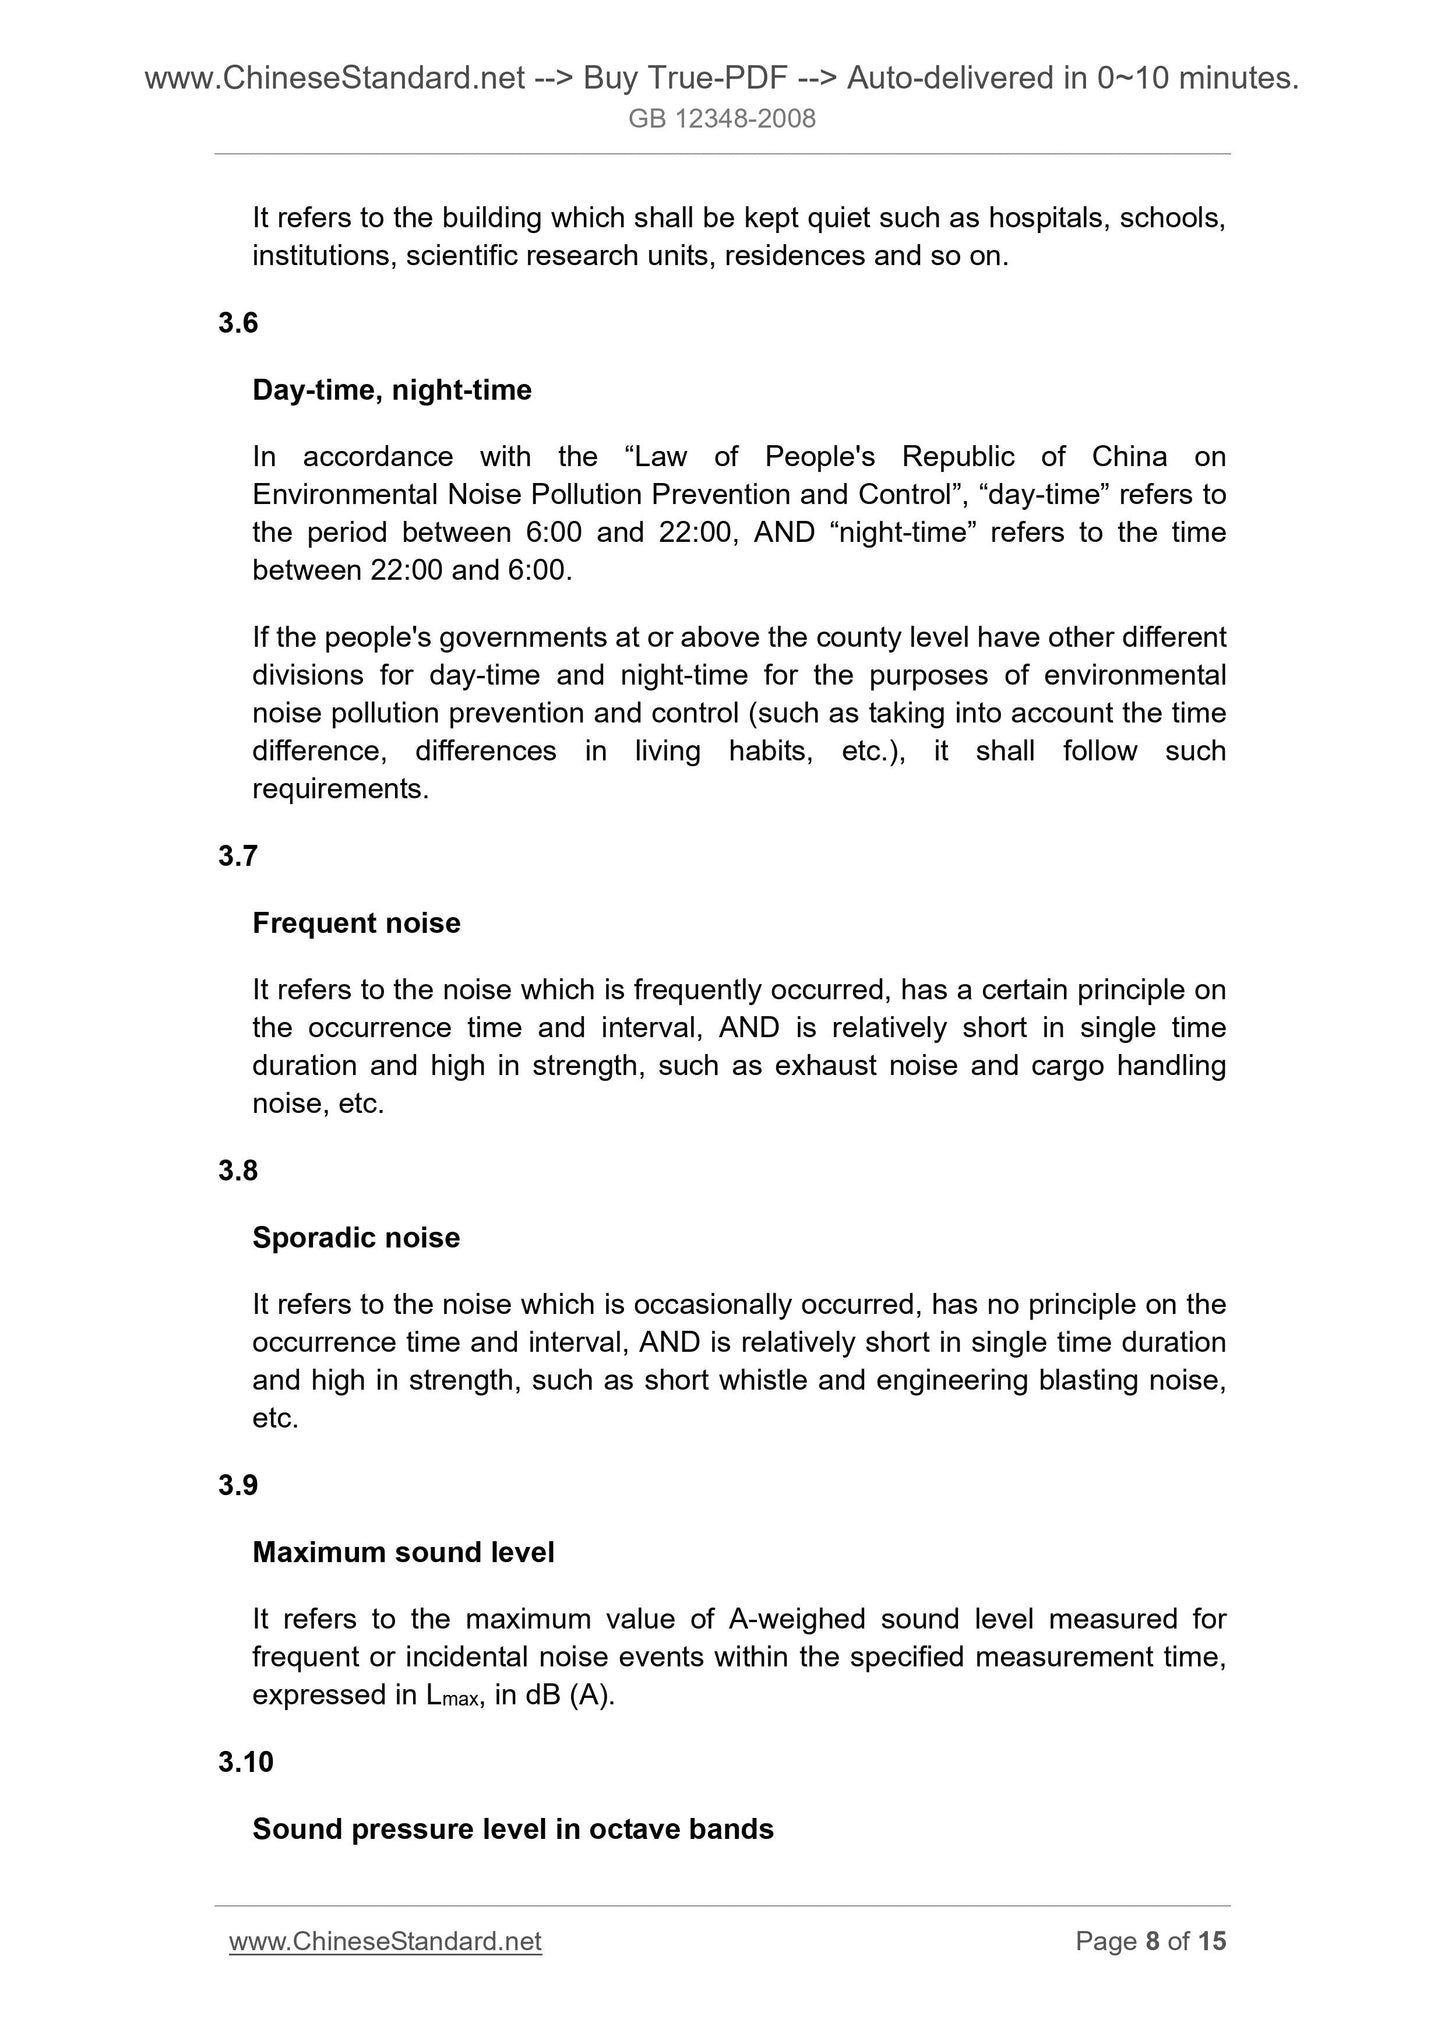 GB 12348-2008 Page 6